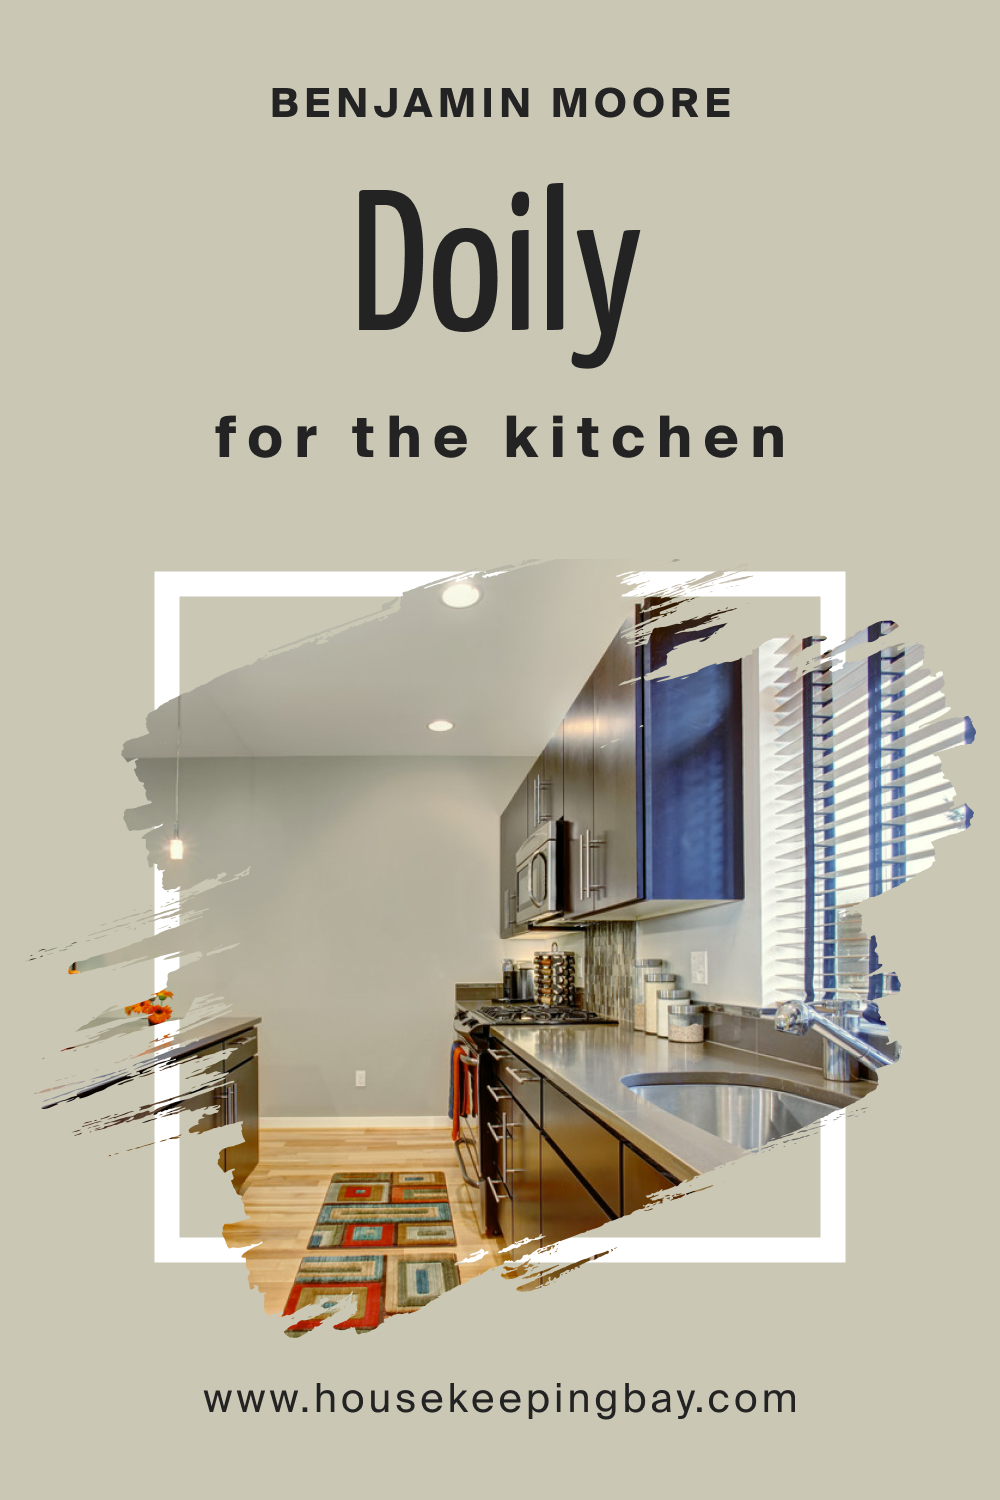 How to Use BM Doily CSP-130 in the Kitchen?